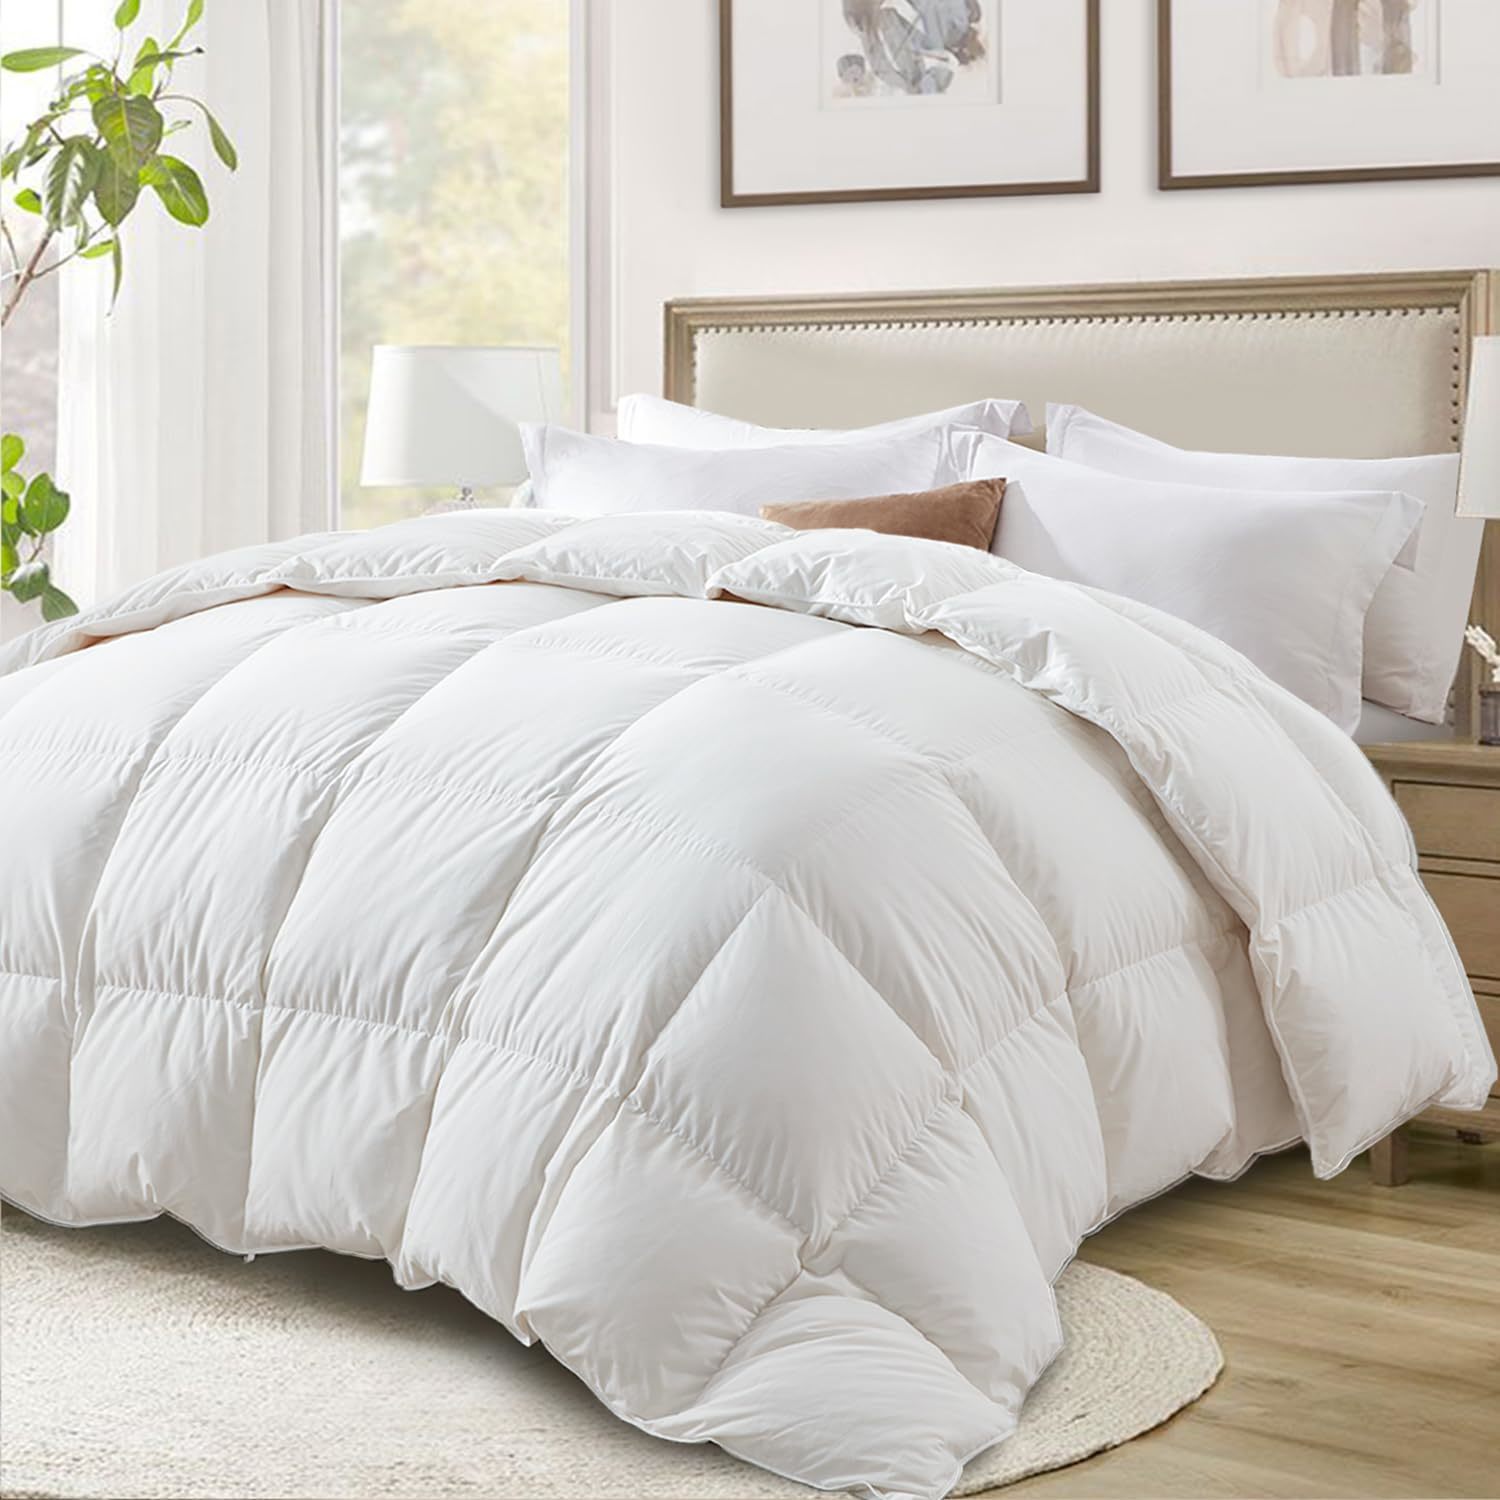 Ultra-Soft Down Feather Comforter King Size,Luxurious Hotel Collection Fluffy Du - $267.99